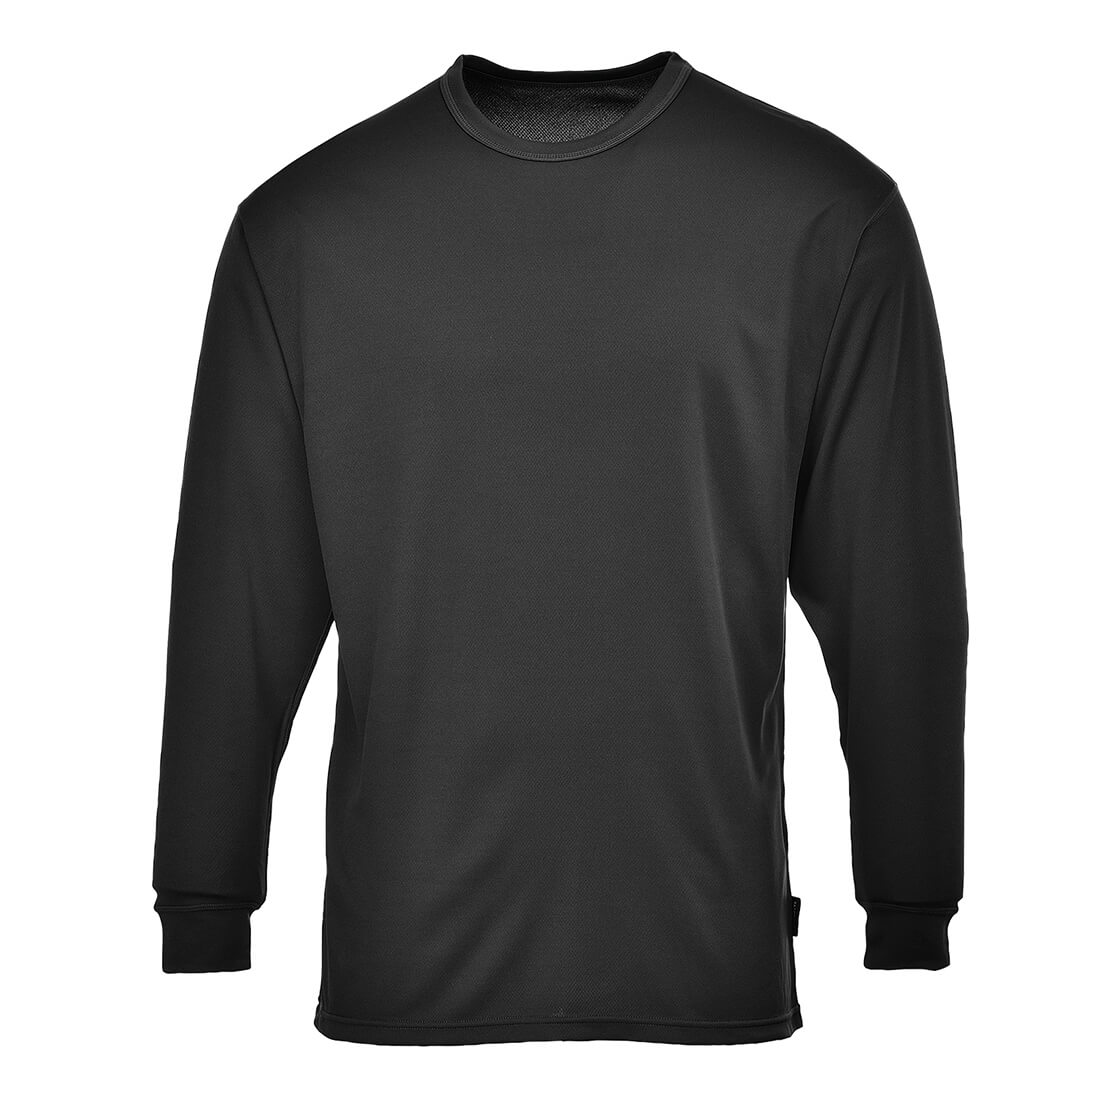 Photo of Base Layer Thermal Top Long Sleeve Black M